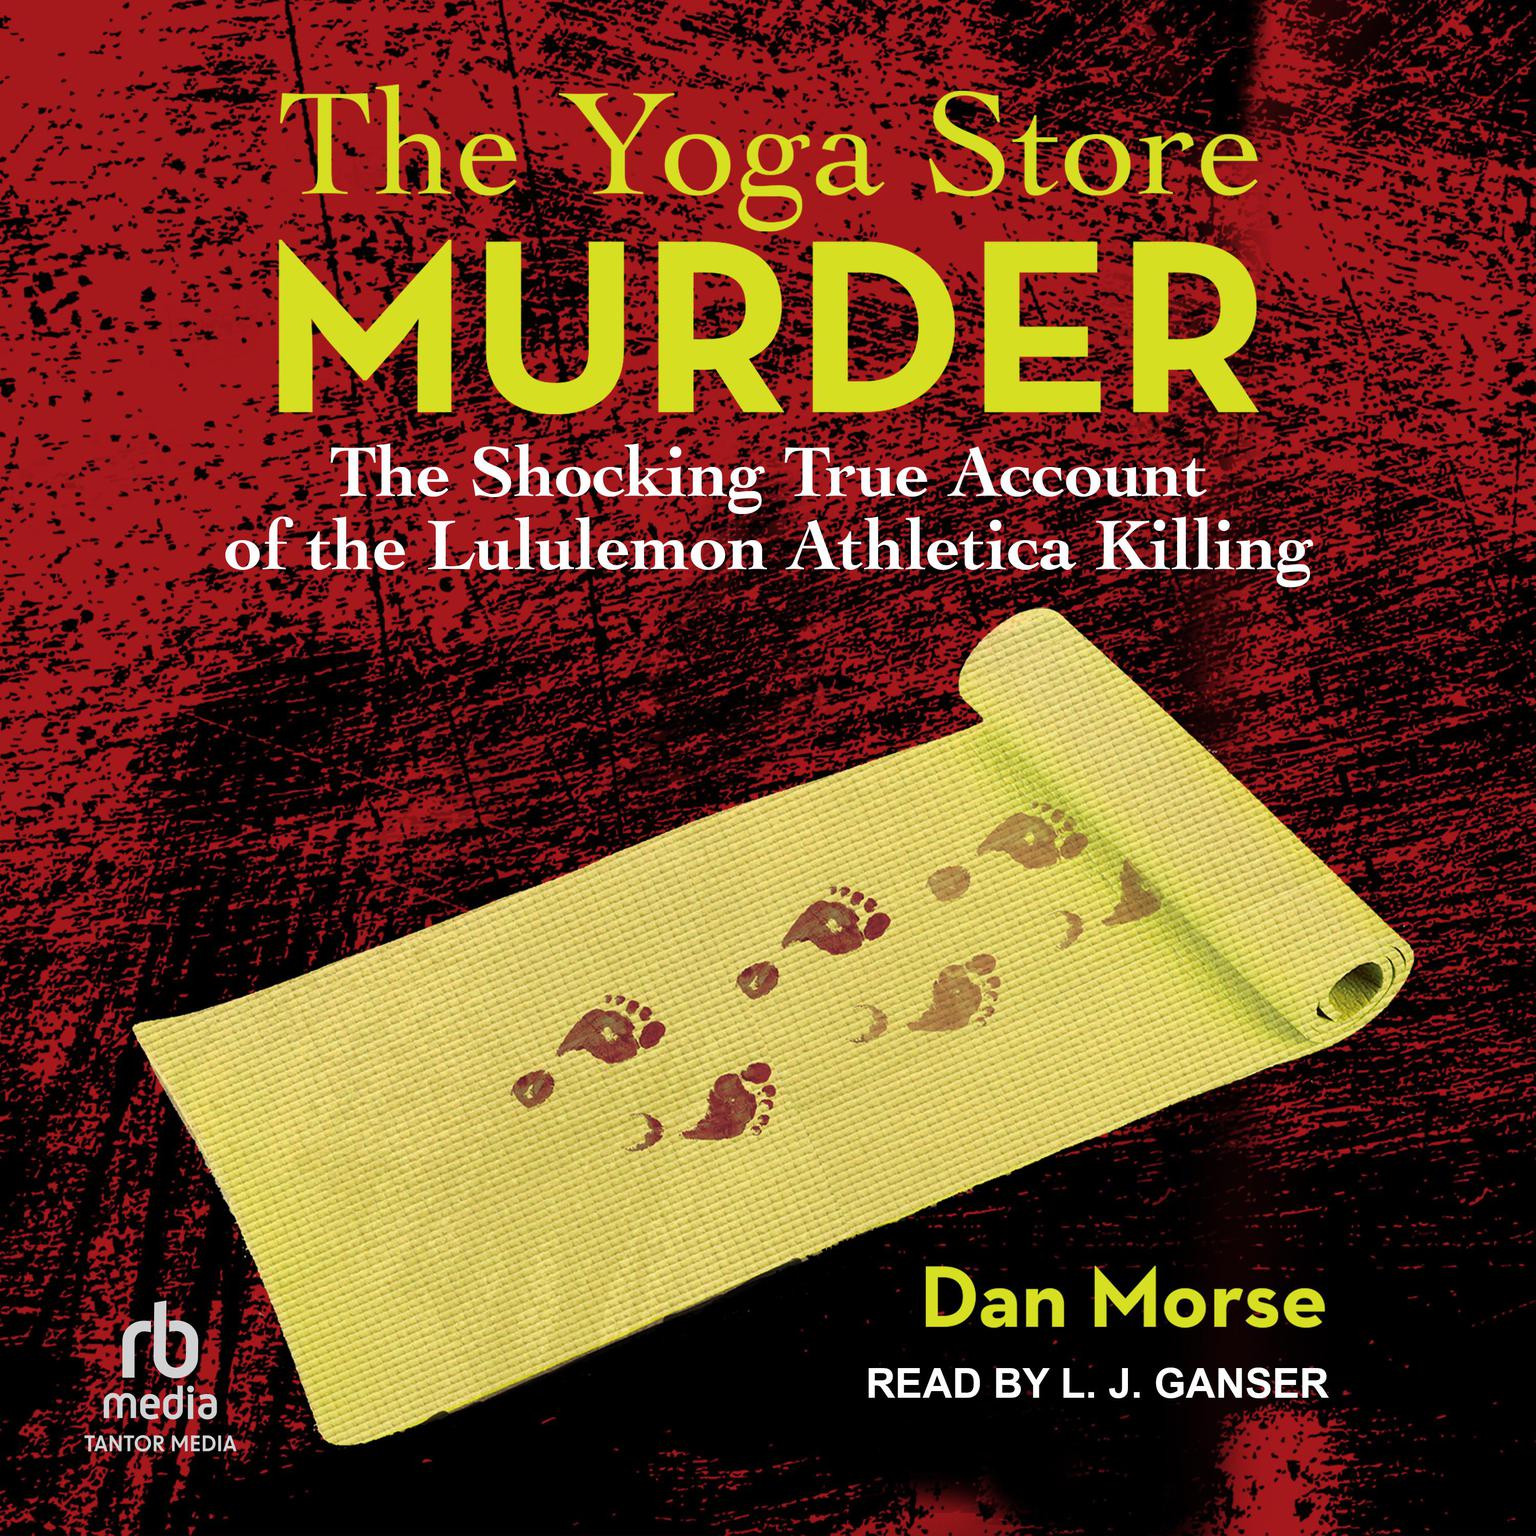 The Yoga Store Murder: The Shocking True Account of the Lululemon Athletica Killing Audiobook, by Dan Morse